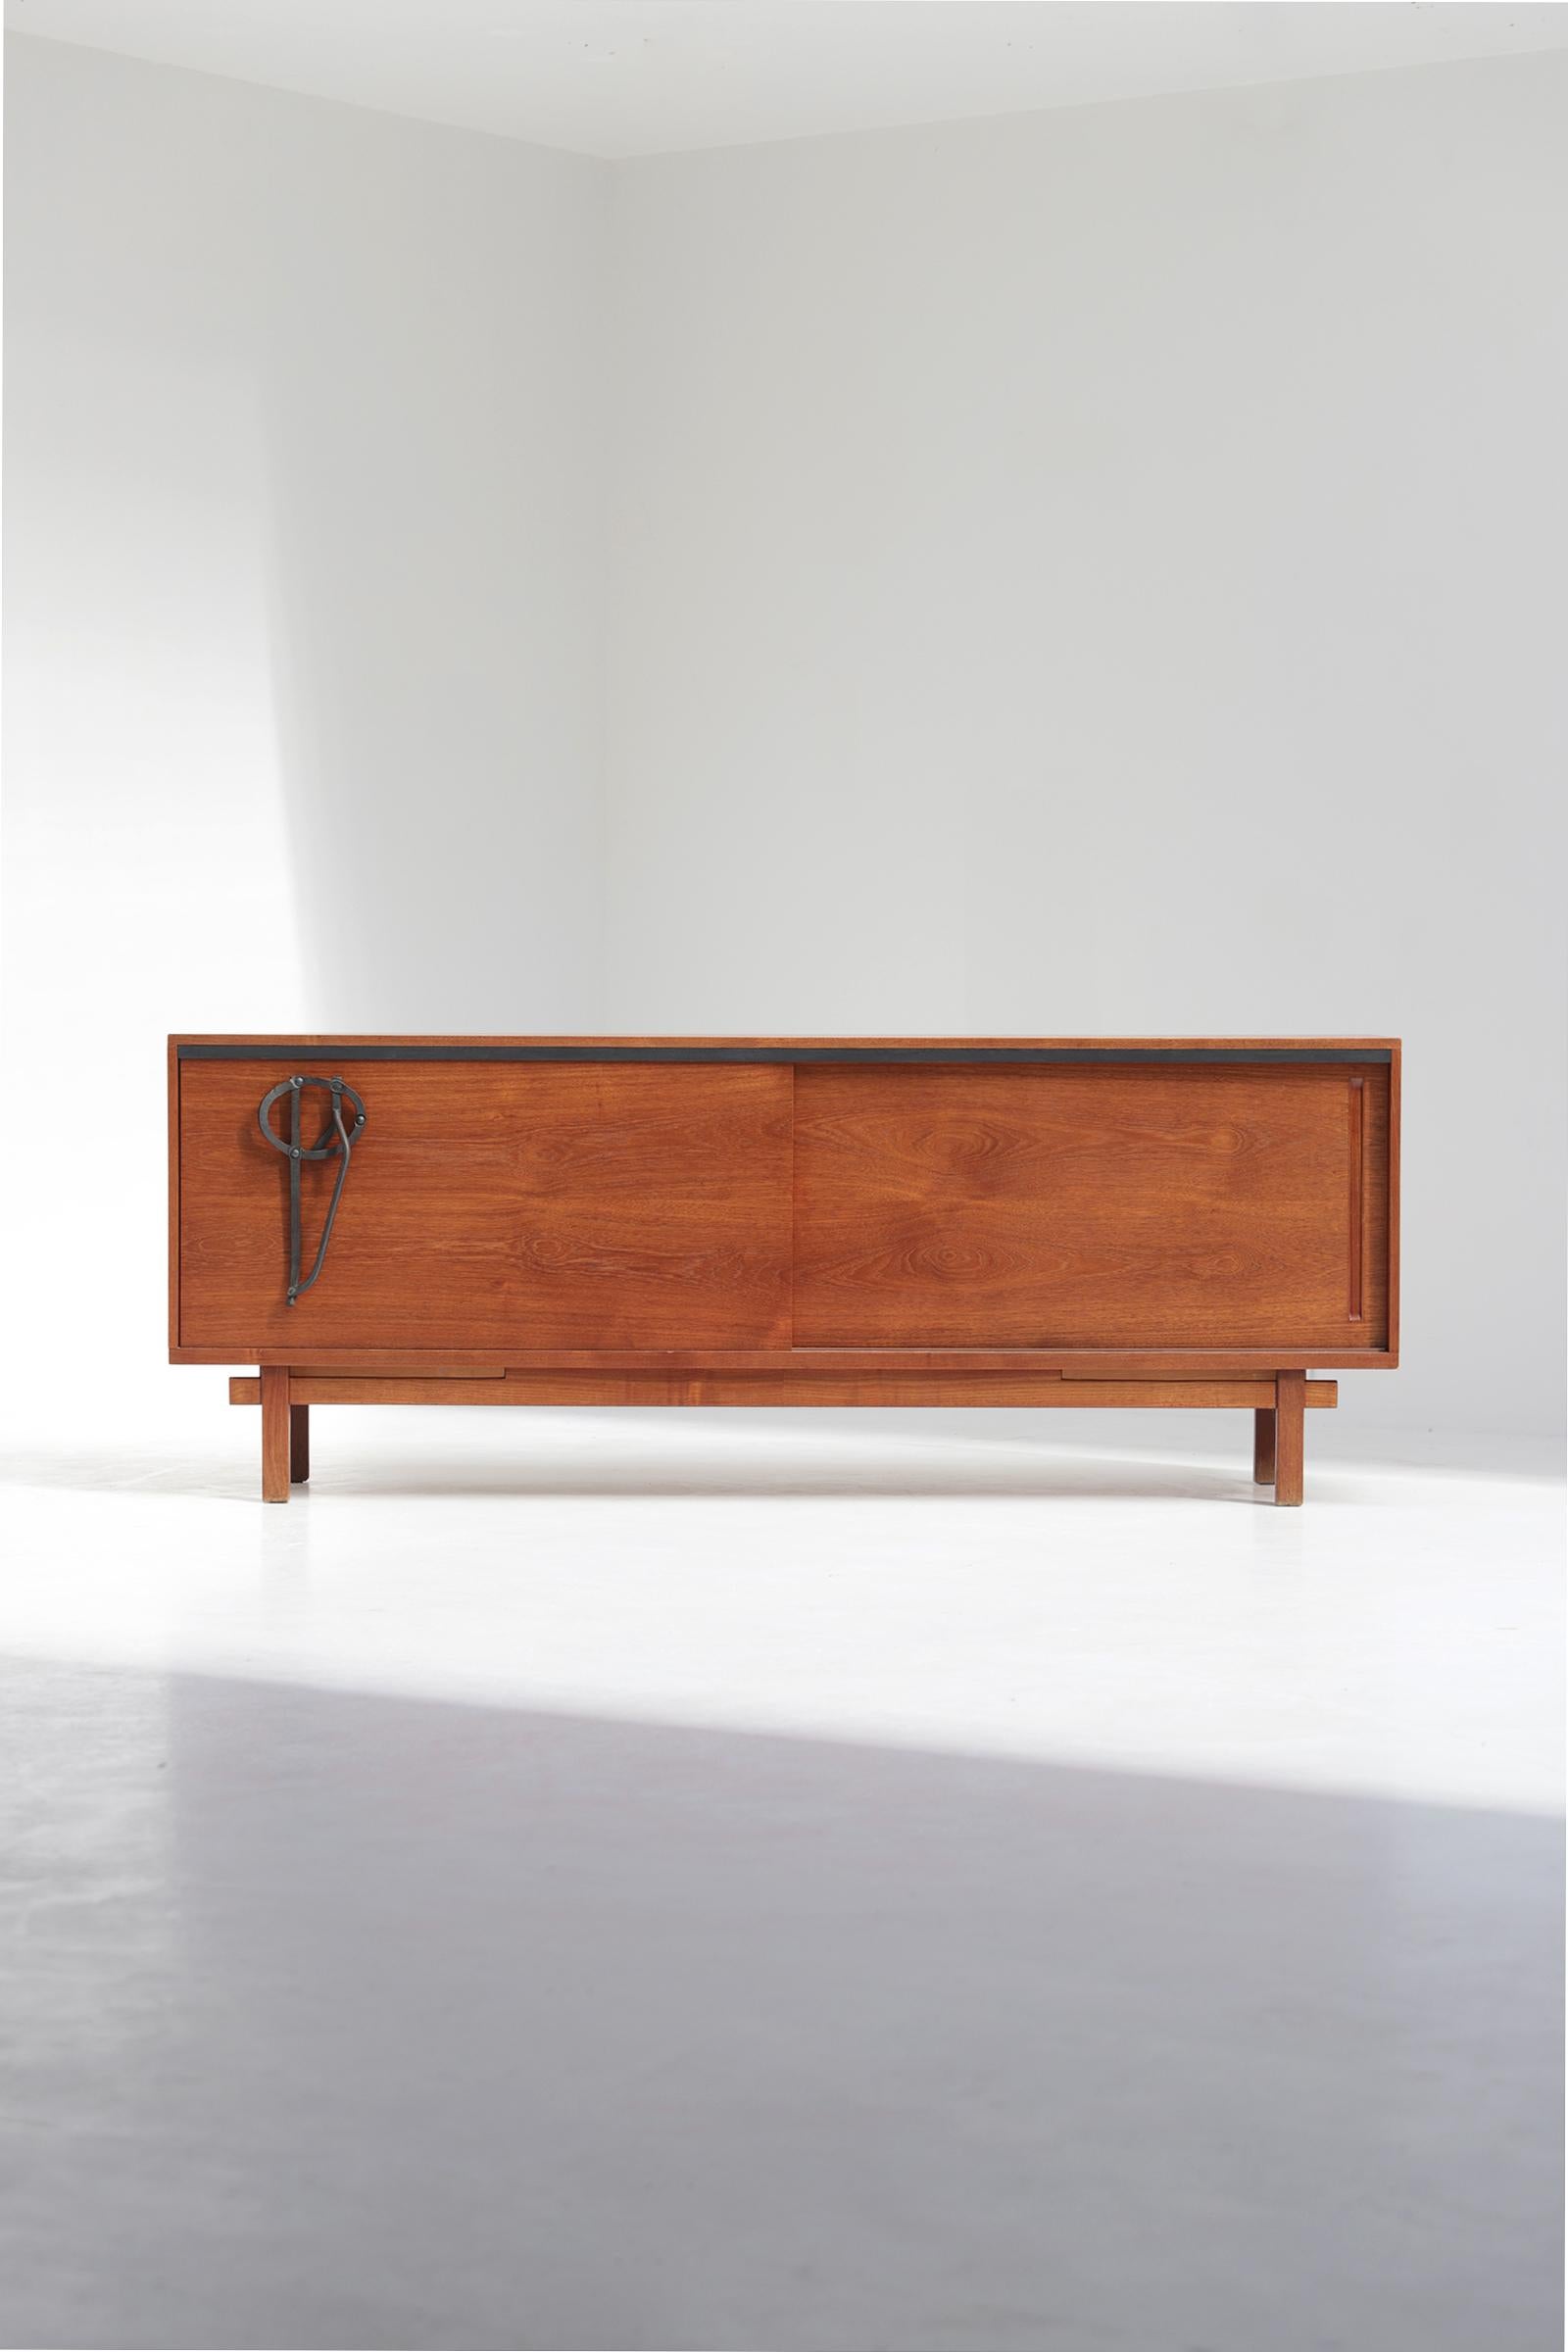 Mid-Century Modern Midcentury wooden sideboard by J. Batenburg and E. Souply for MI Belgium 1960s.